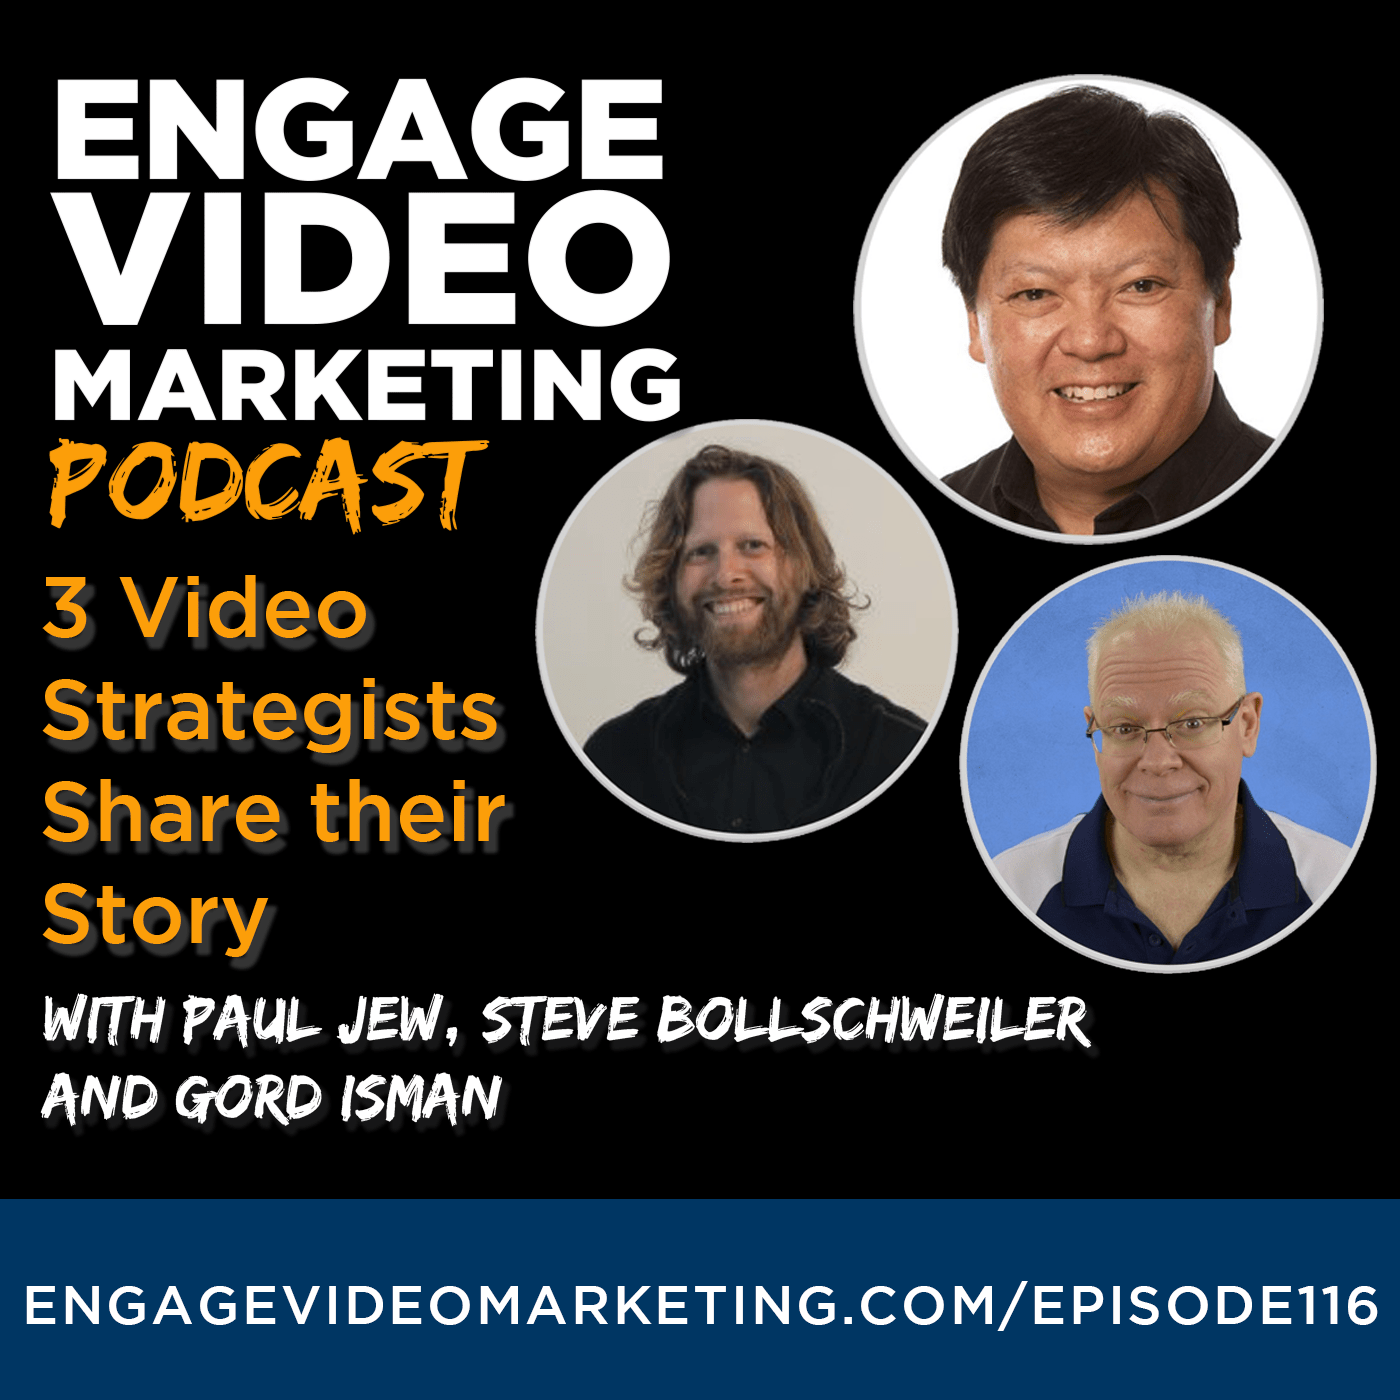 3 Video Strategists Share Their Story